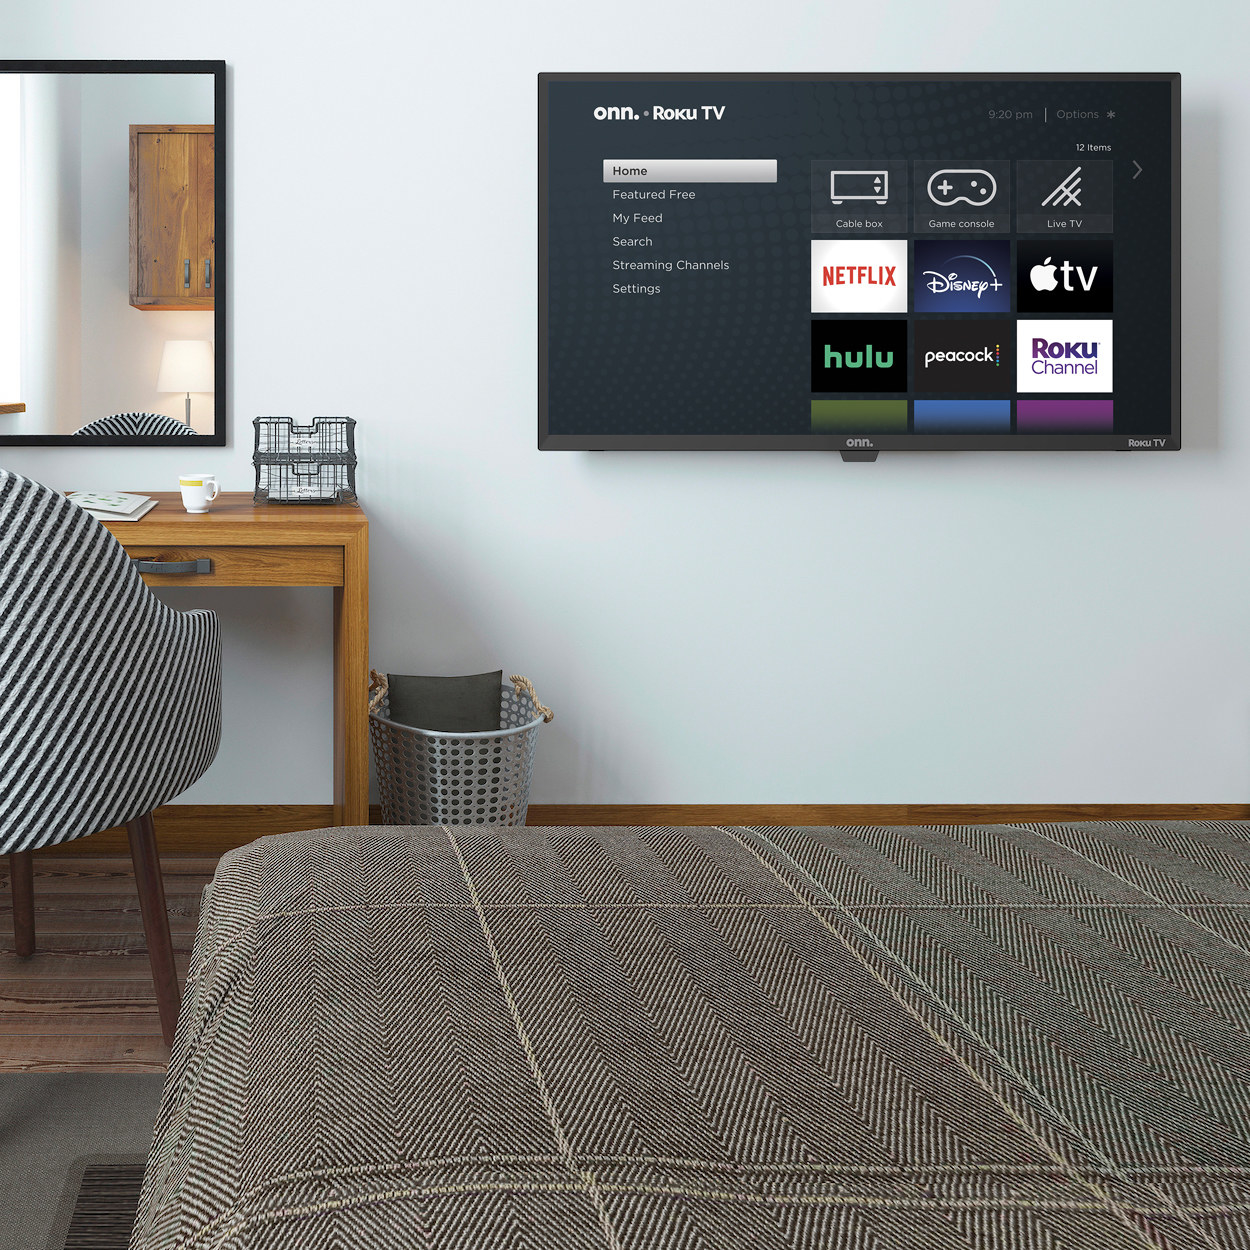 roku TV mounted on a wall in a bedroom